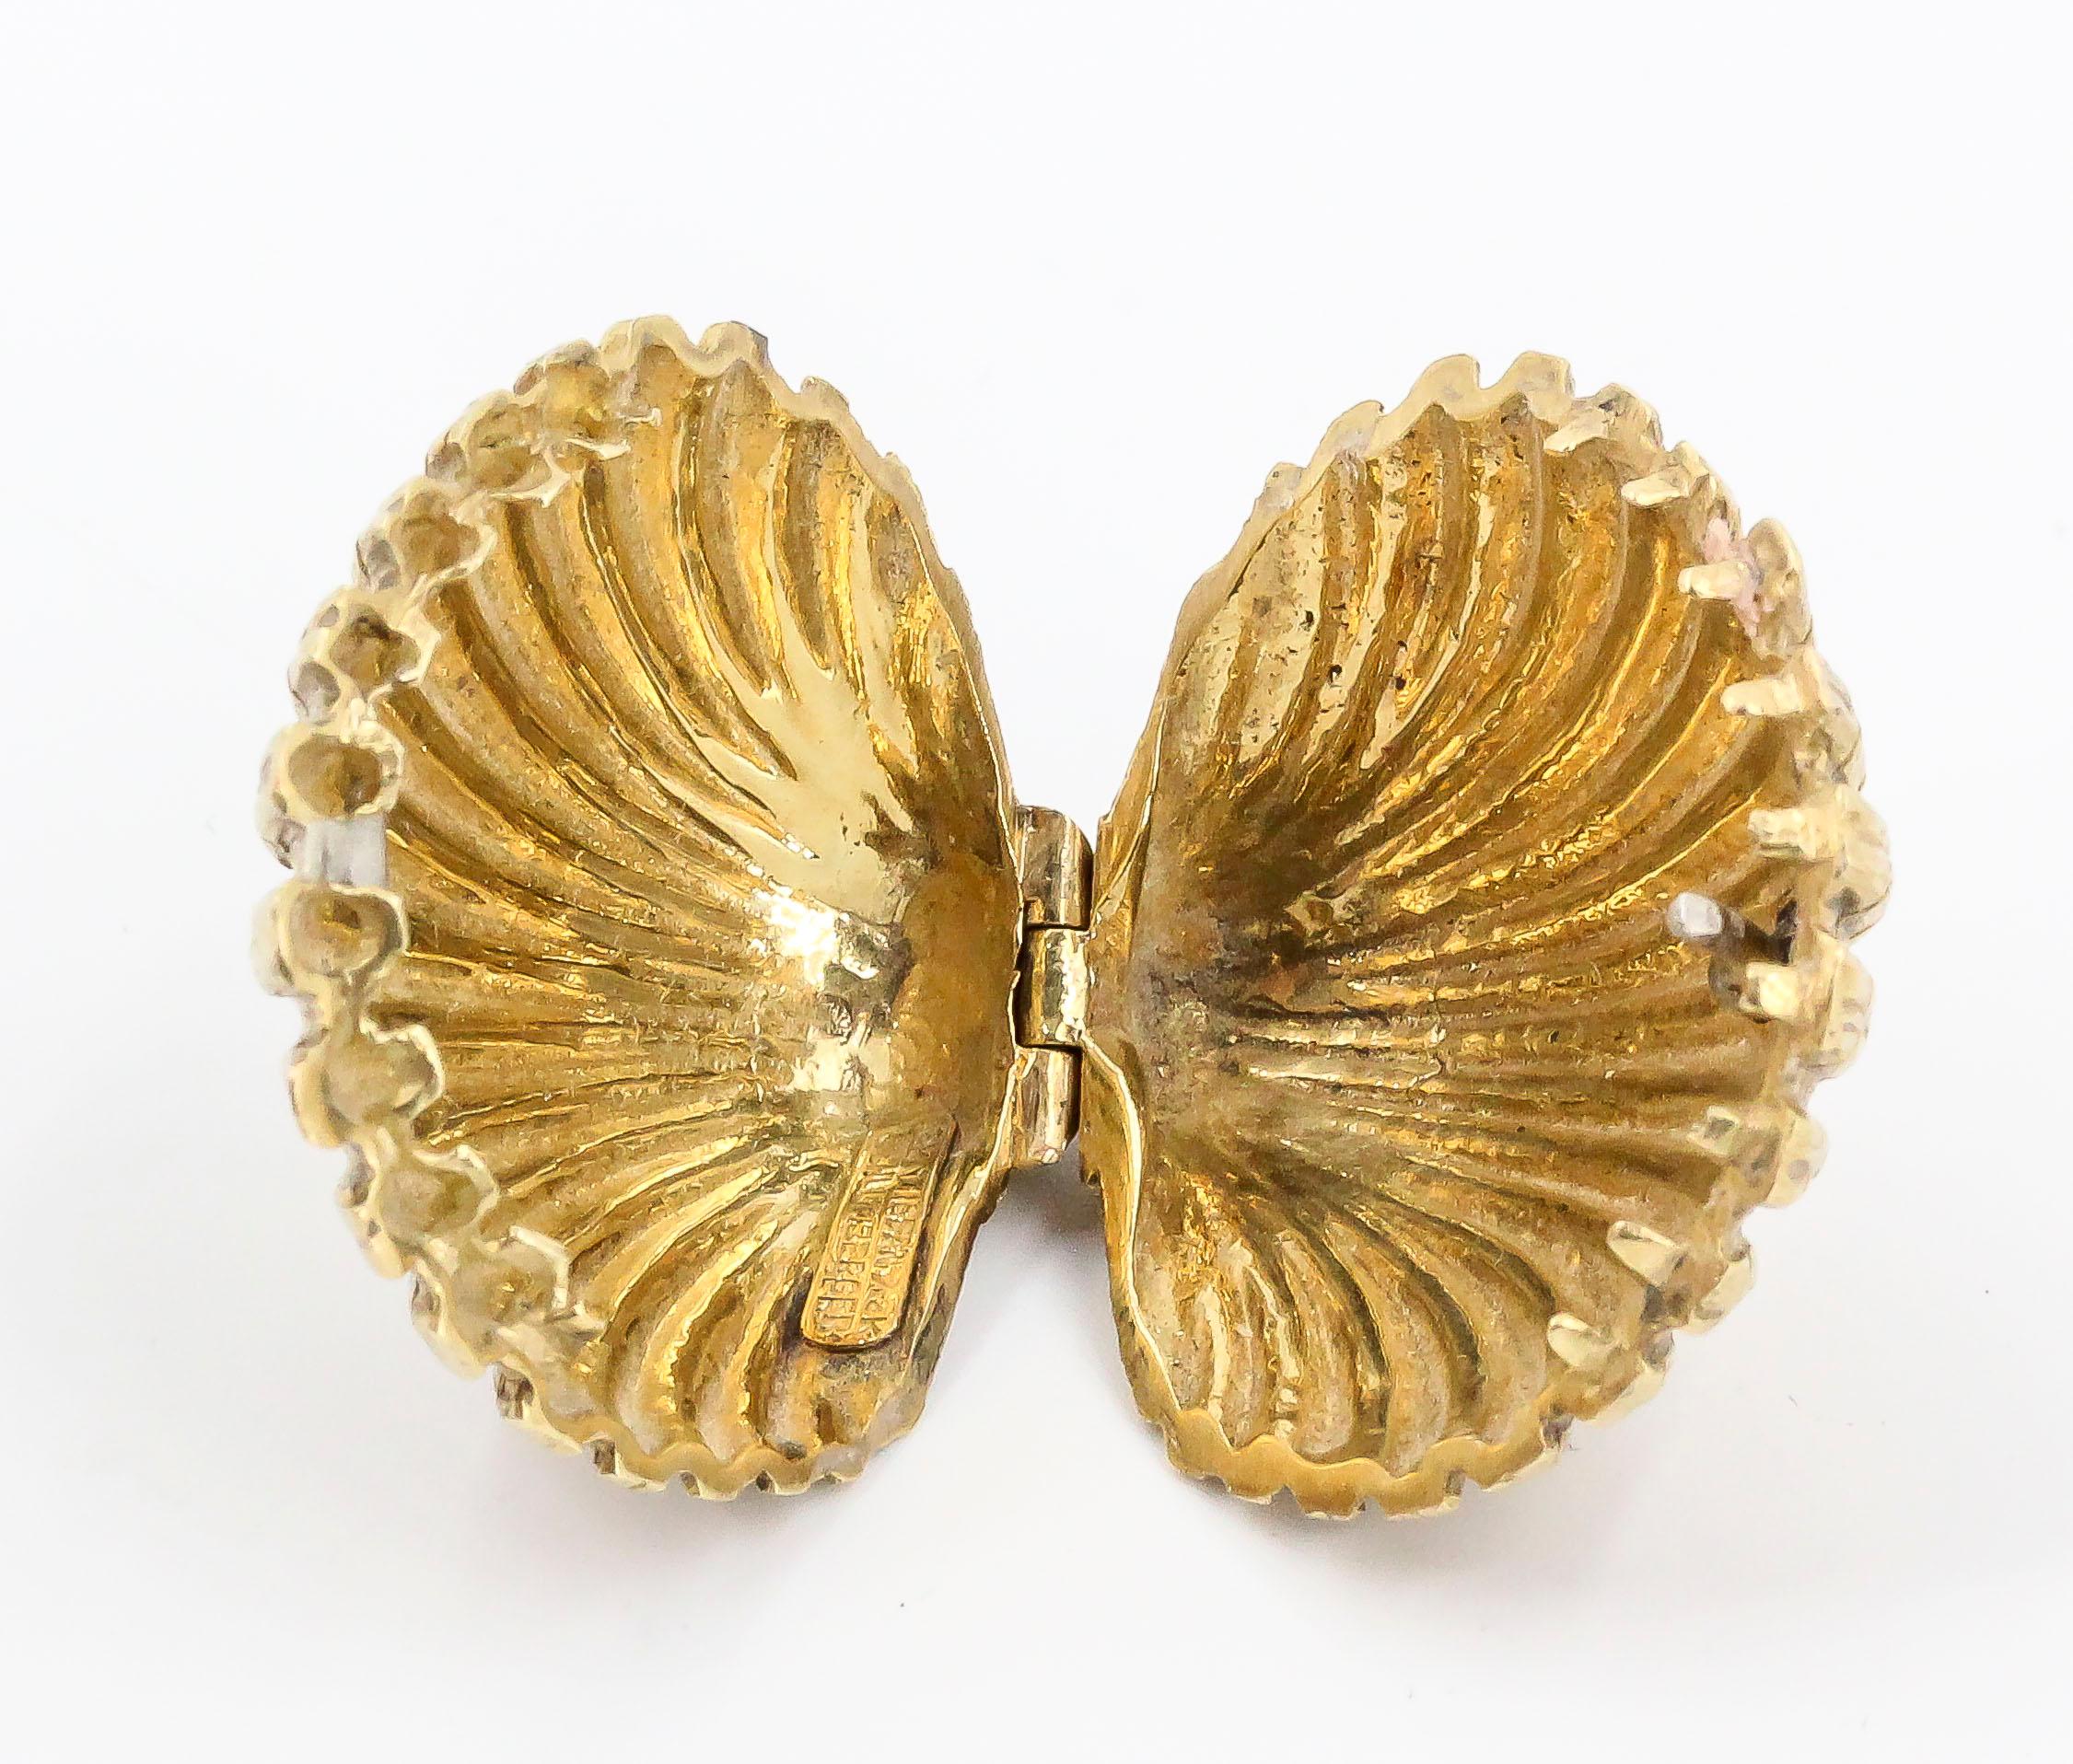 Collectible 18K yellow gold seashell shaped pill box by Tiffany & Co. Schlumberger, circa 1970s. 

Hallmarks: Tiffany, 18K, Schlumberger.